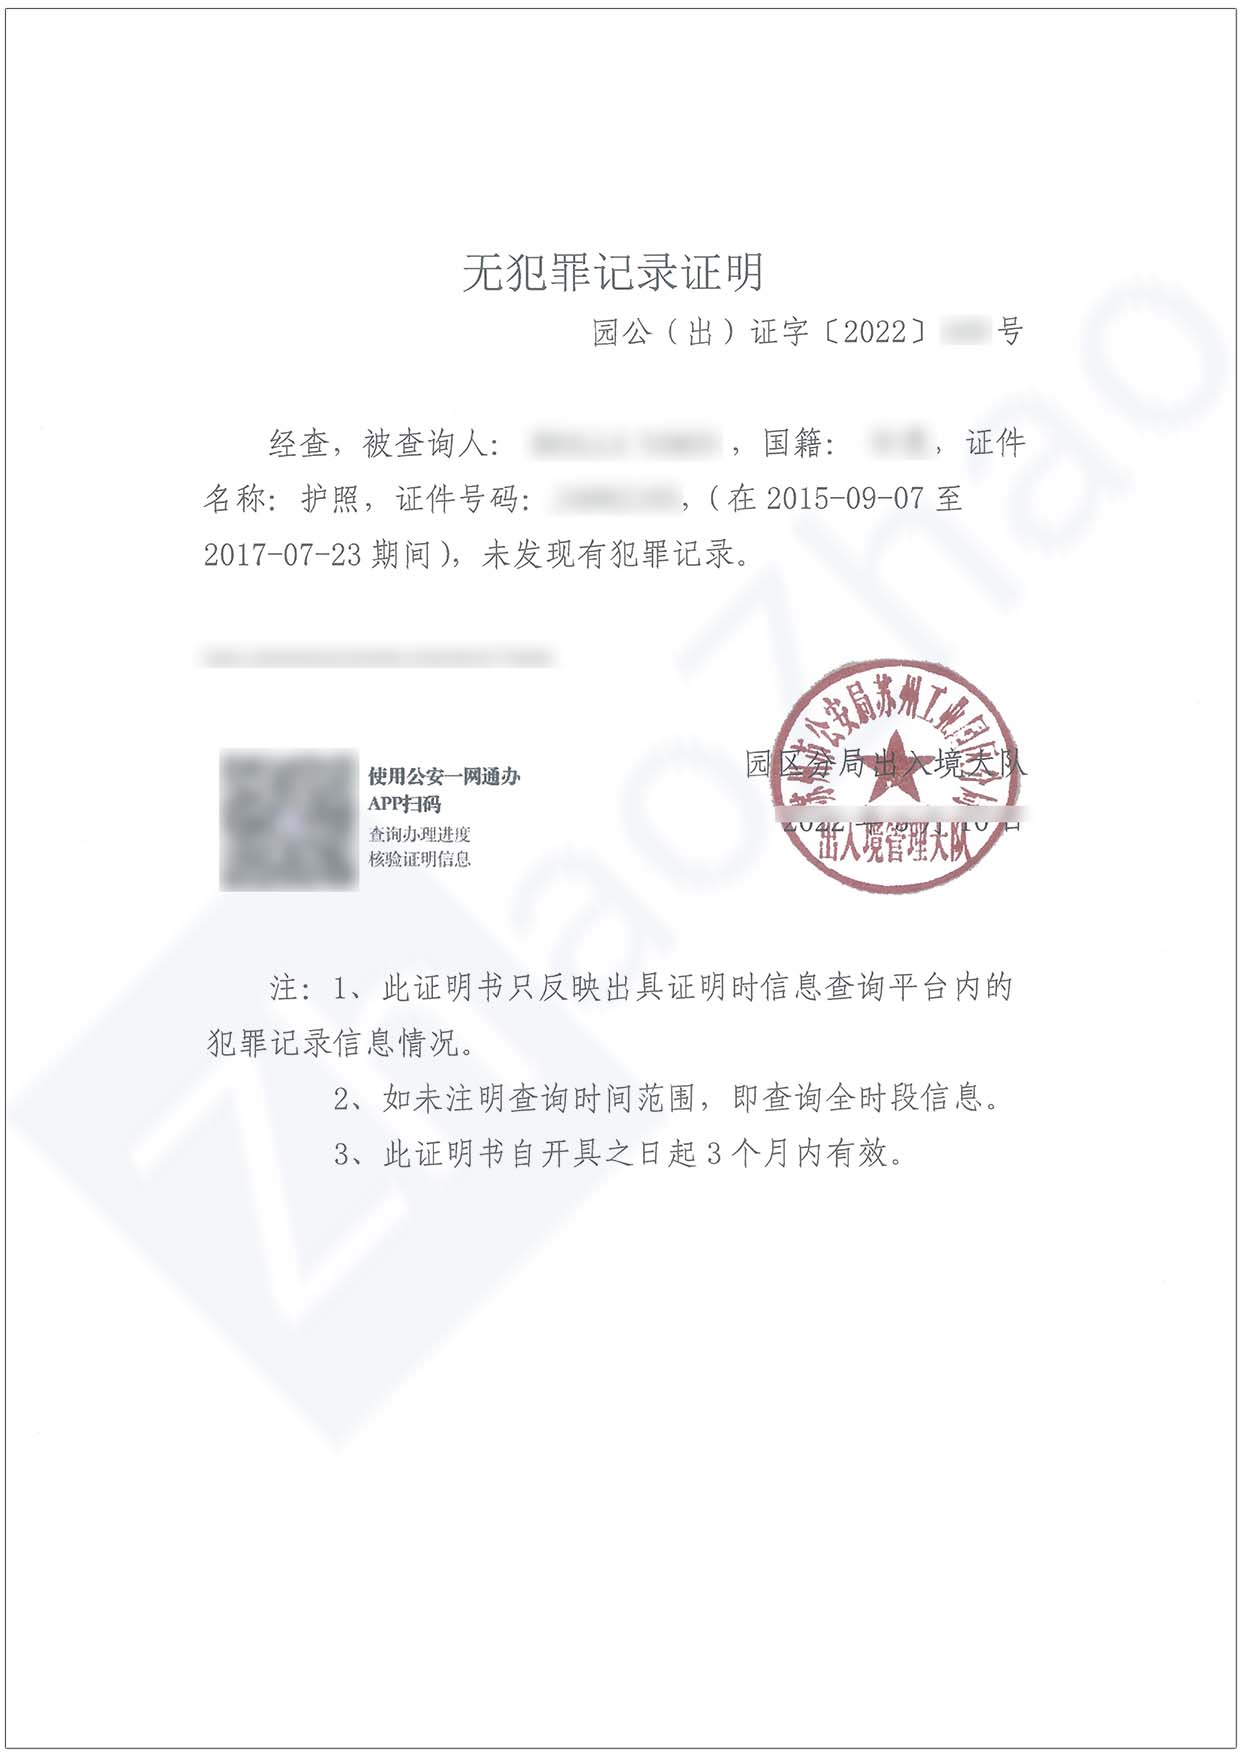 Guide For Obtaining Your Certificate Of No Criminal Record In Suzhou China Zhaozhao 6438